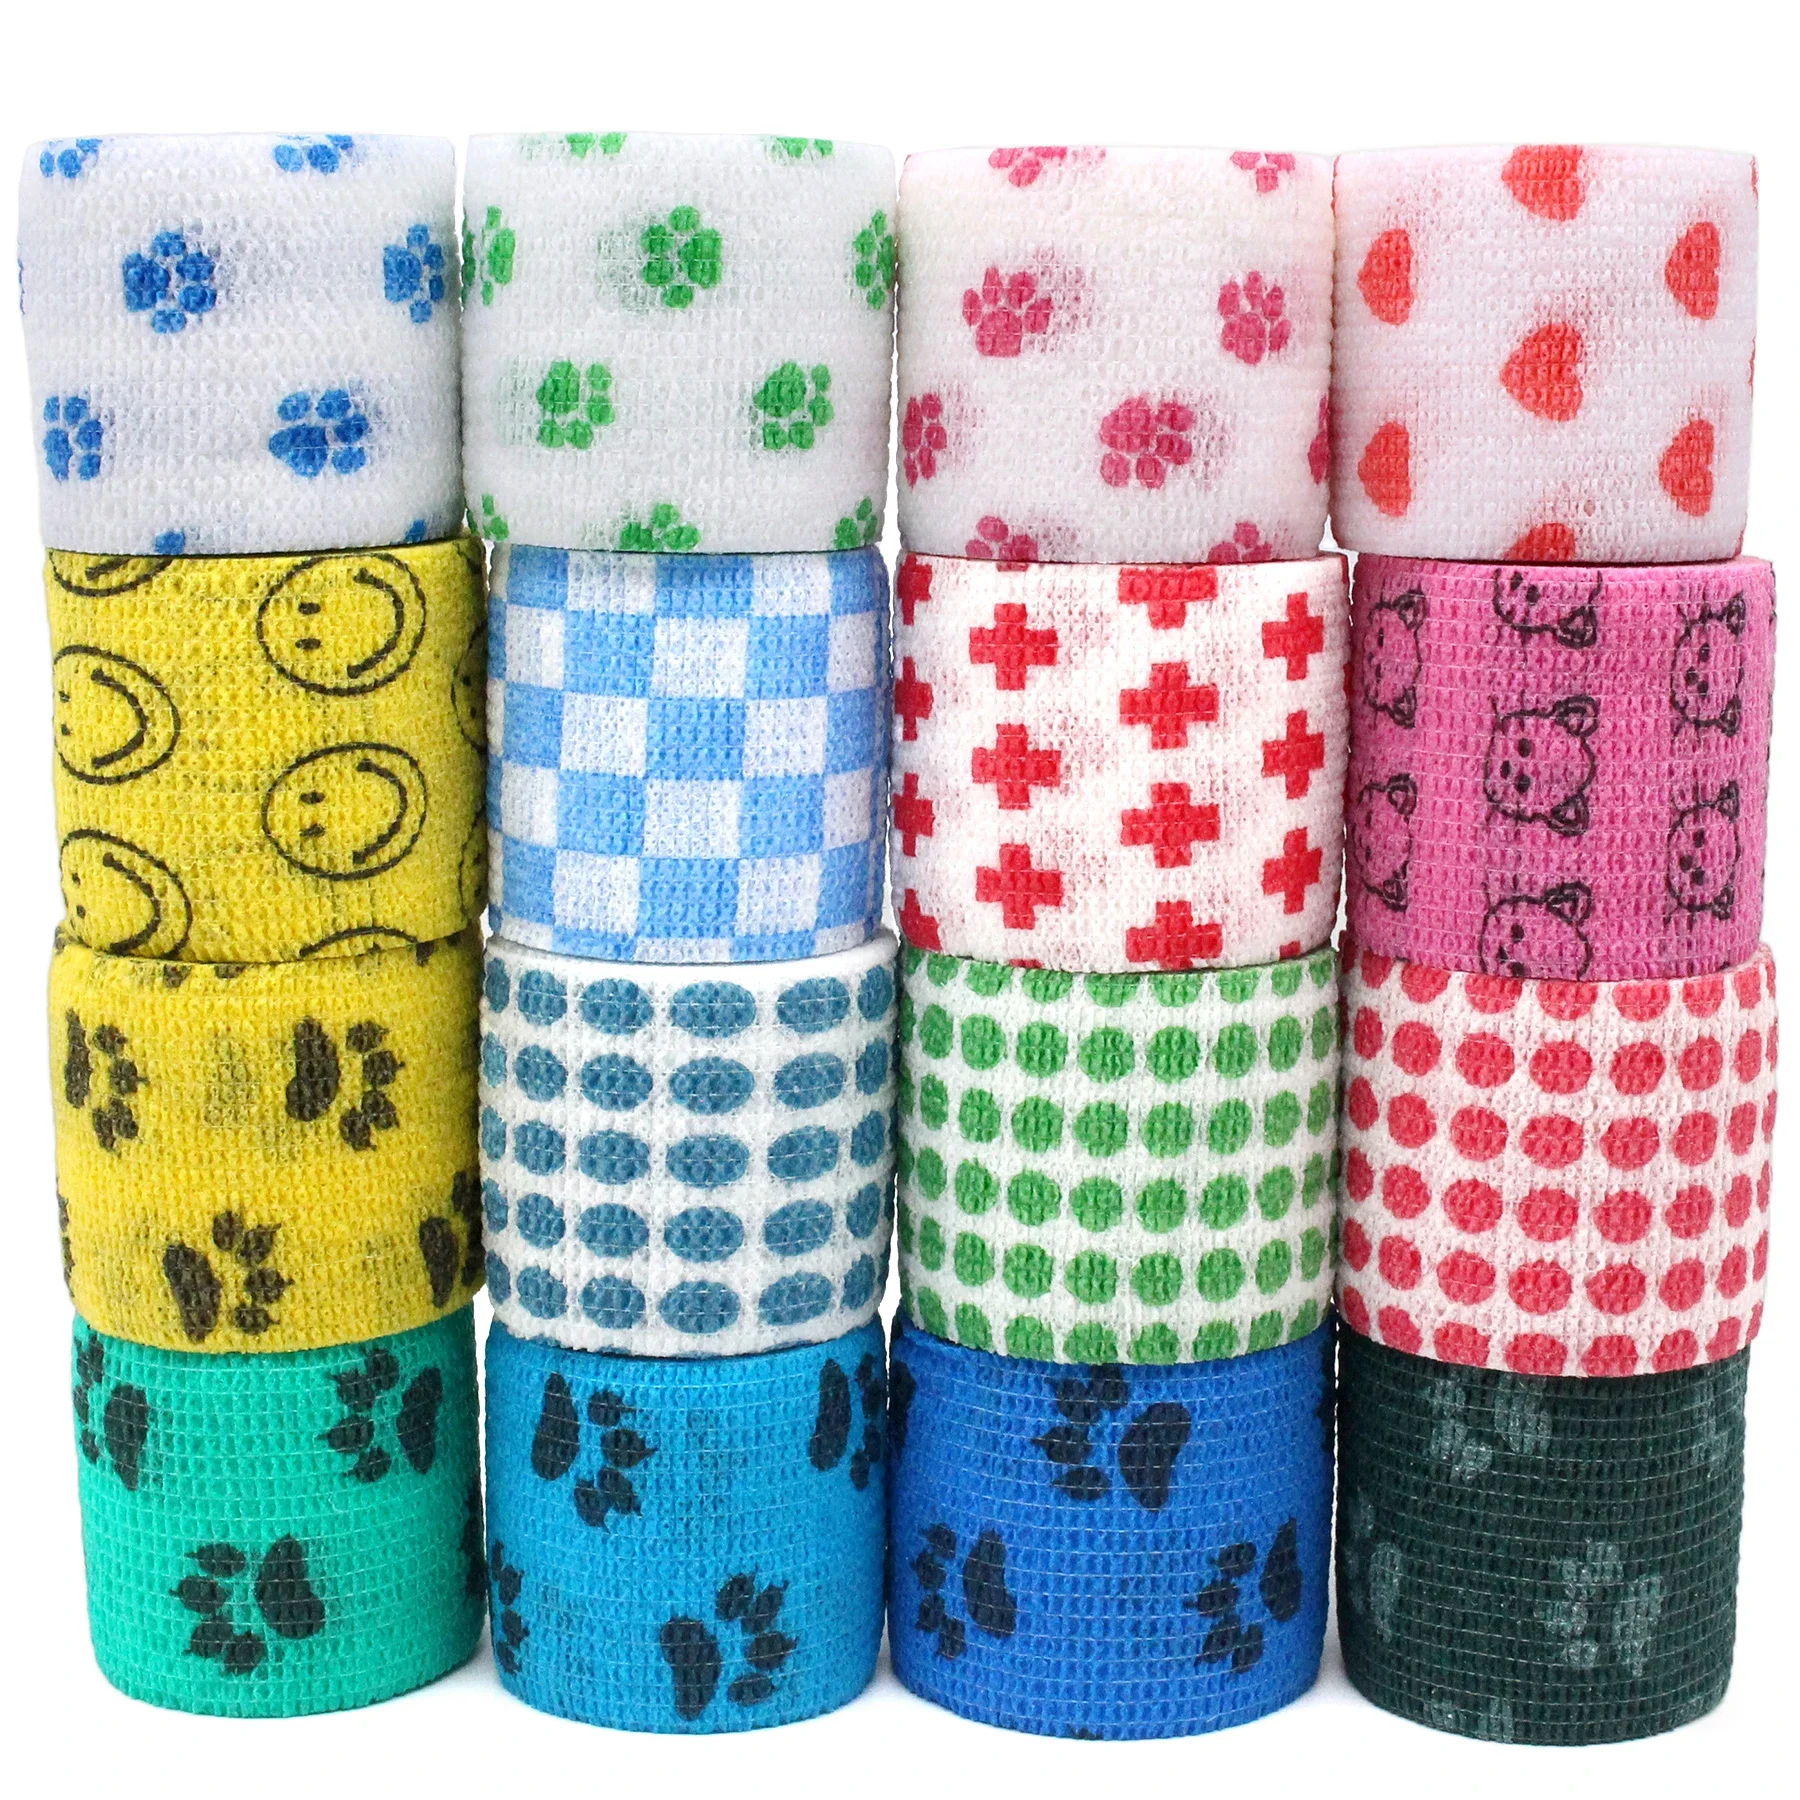 24 Rolls Vet Wrap Cohesive Bandage Bulk Self Adherent Wrap Non-Woven Vet Tape First Aid for Dogs Cats Horses